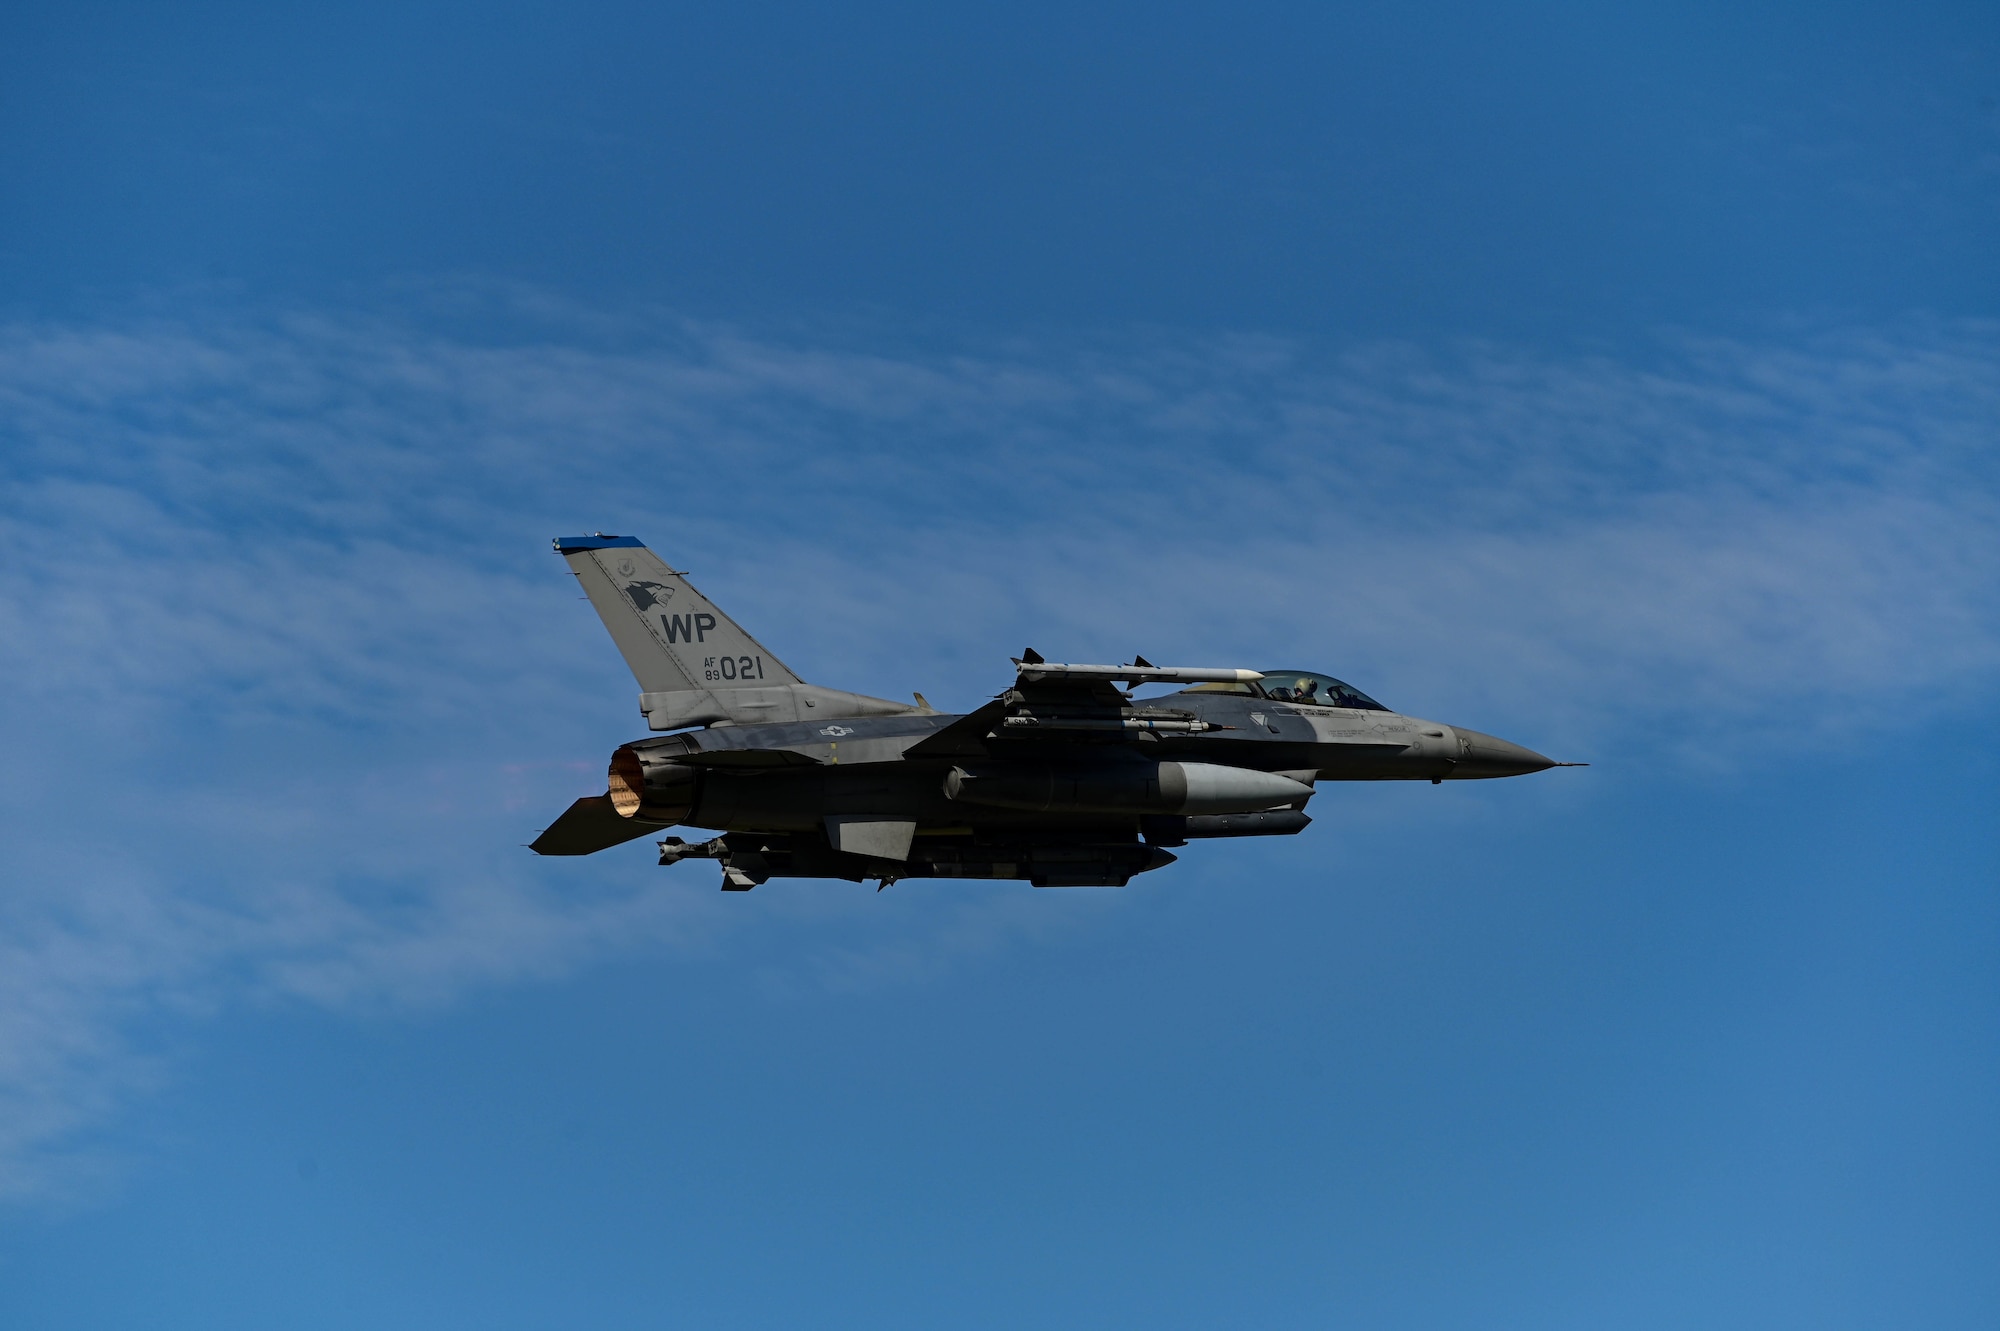 A U.S. Air Force F-16 Fighting Falcon assigned to the 8th Fighter Wing soars through the sky during routine training at Kunsan Air Base, Republic of Korea, Sept. 22, 2022. The F-16 is the 8th FW’s primary aircraft. (U.S. Air Force Photo by Senior Airman Shannon Braaten)